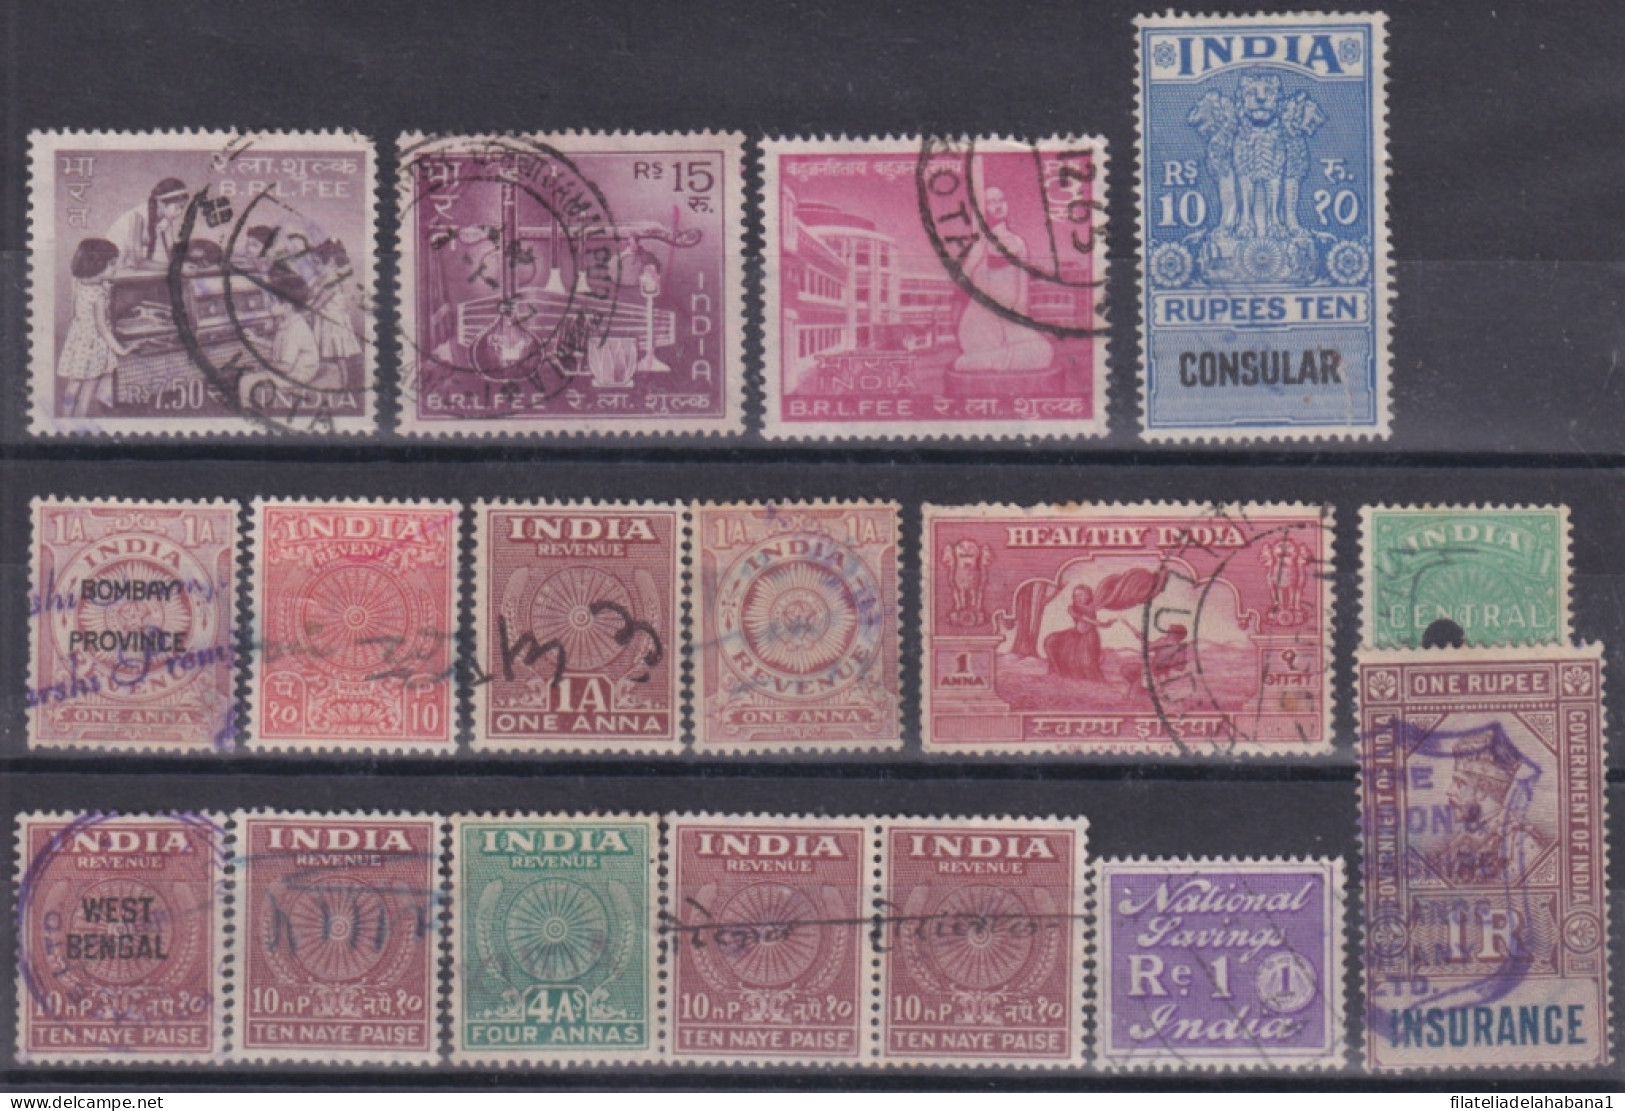 F-EX49722 INDIA REVENUE RELIEF INSURANCE CONSULAR STAMP LOT.  - Official Stamps